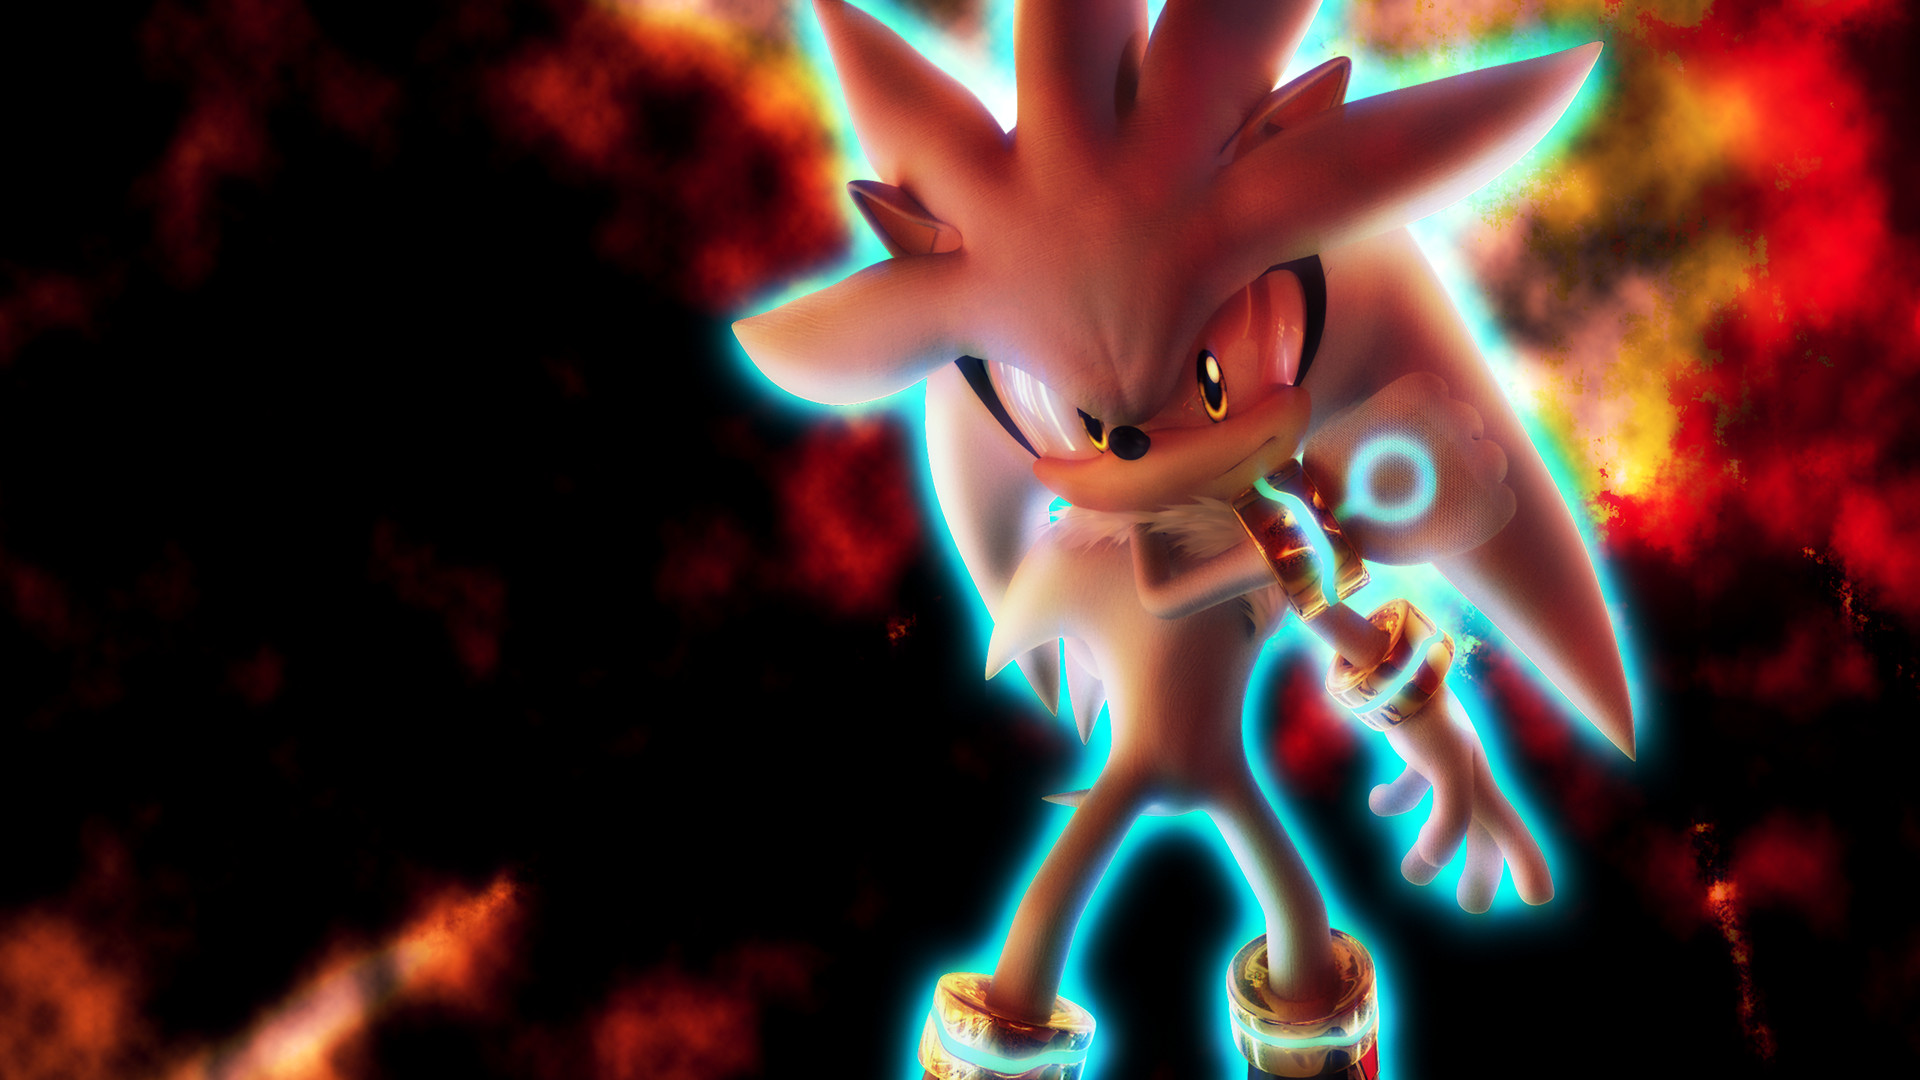 1920x1080 ... Silver the Hedgehog [52] by Light-Rock